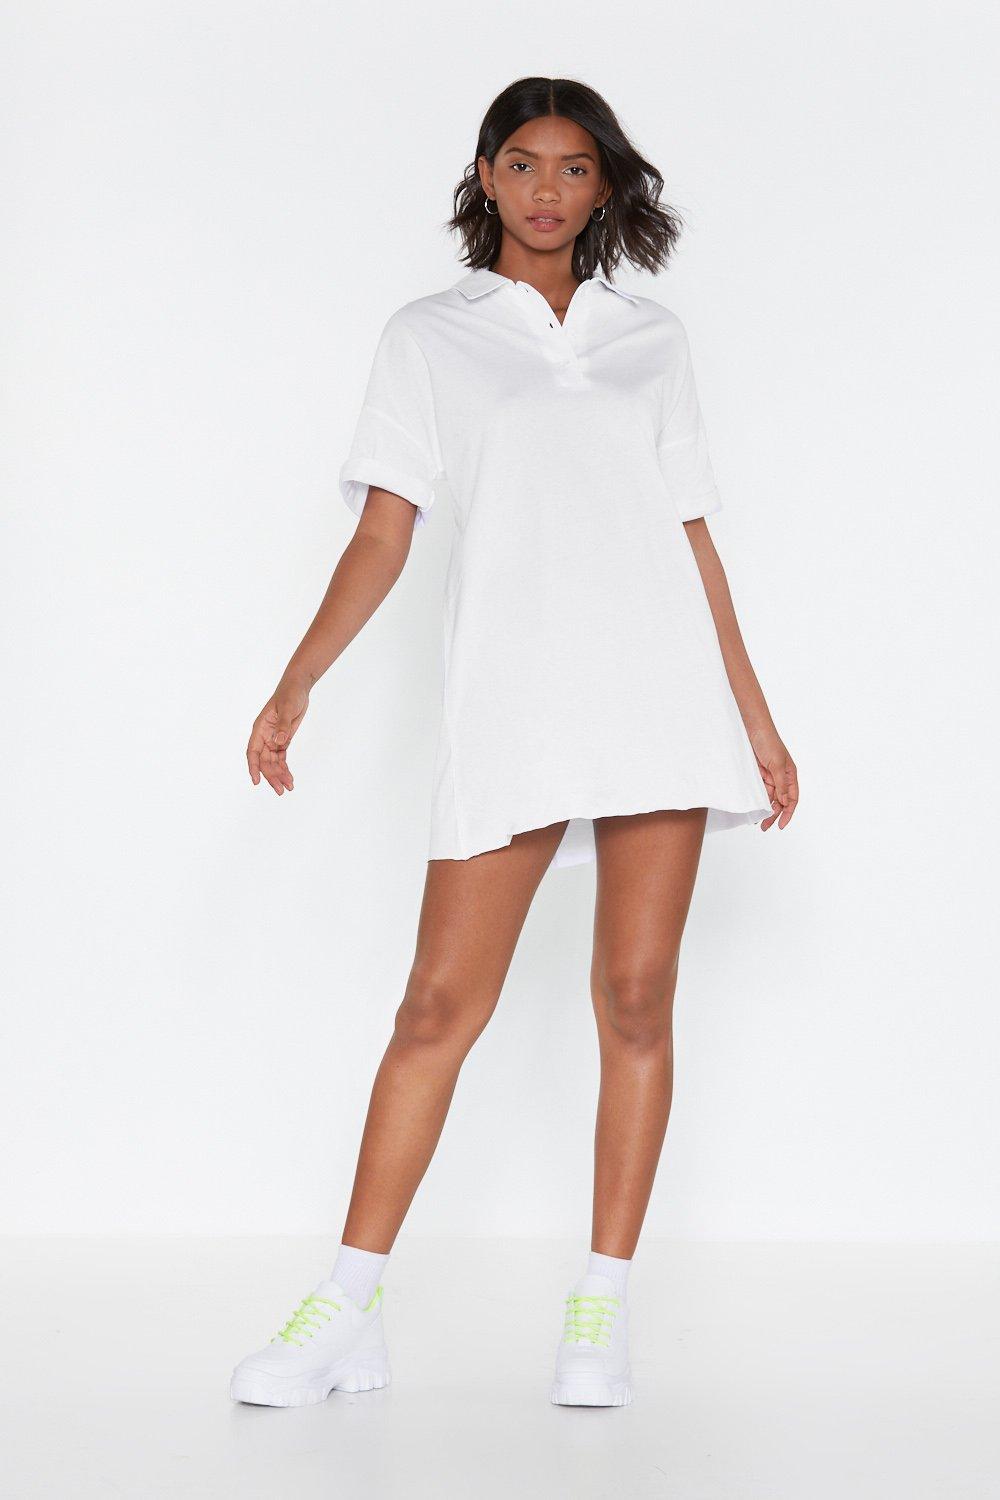 where can you get t shirt dresses